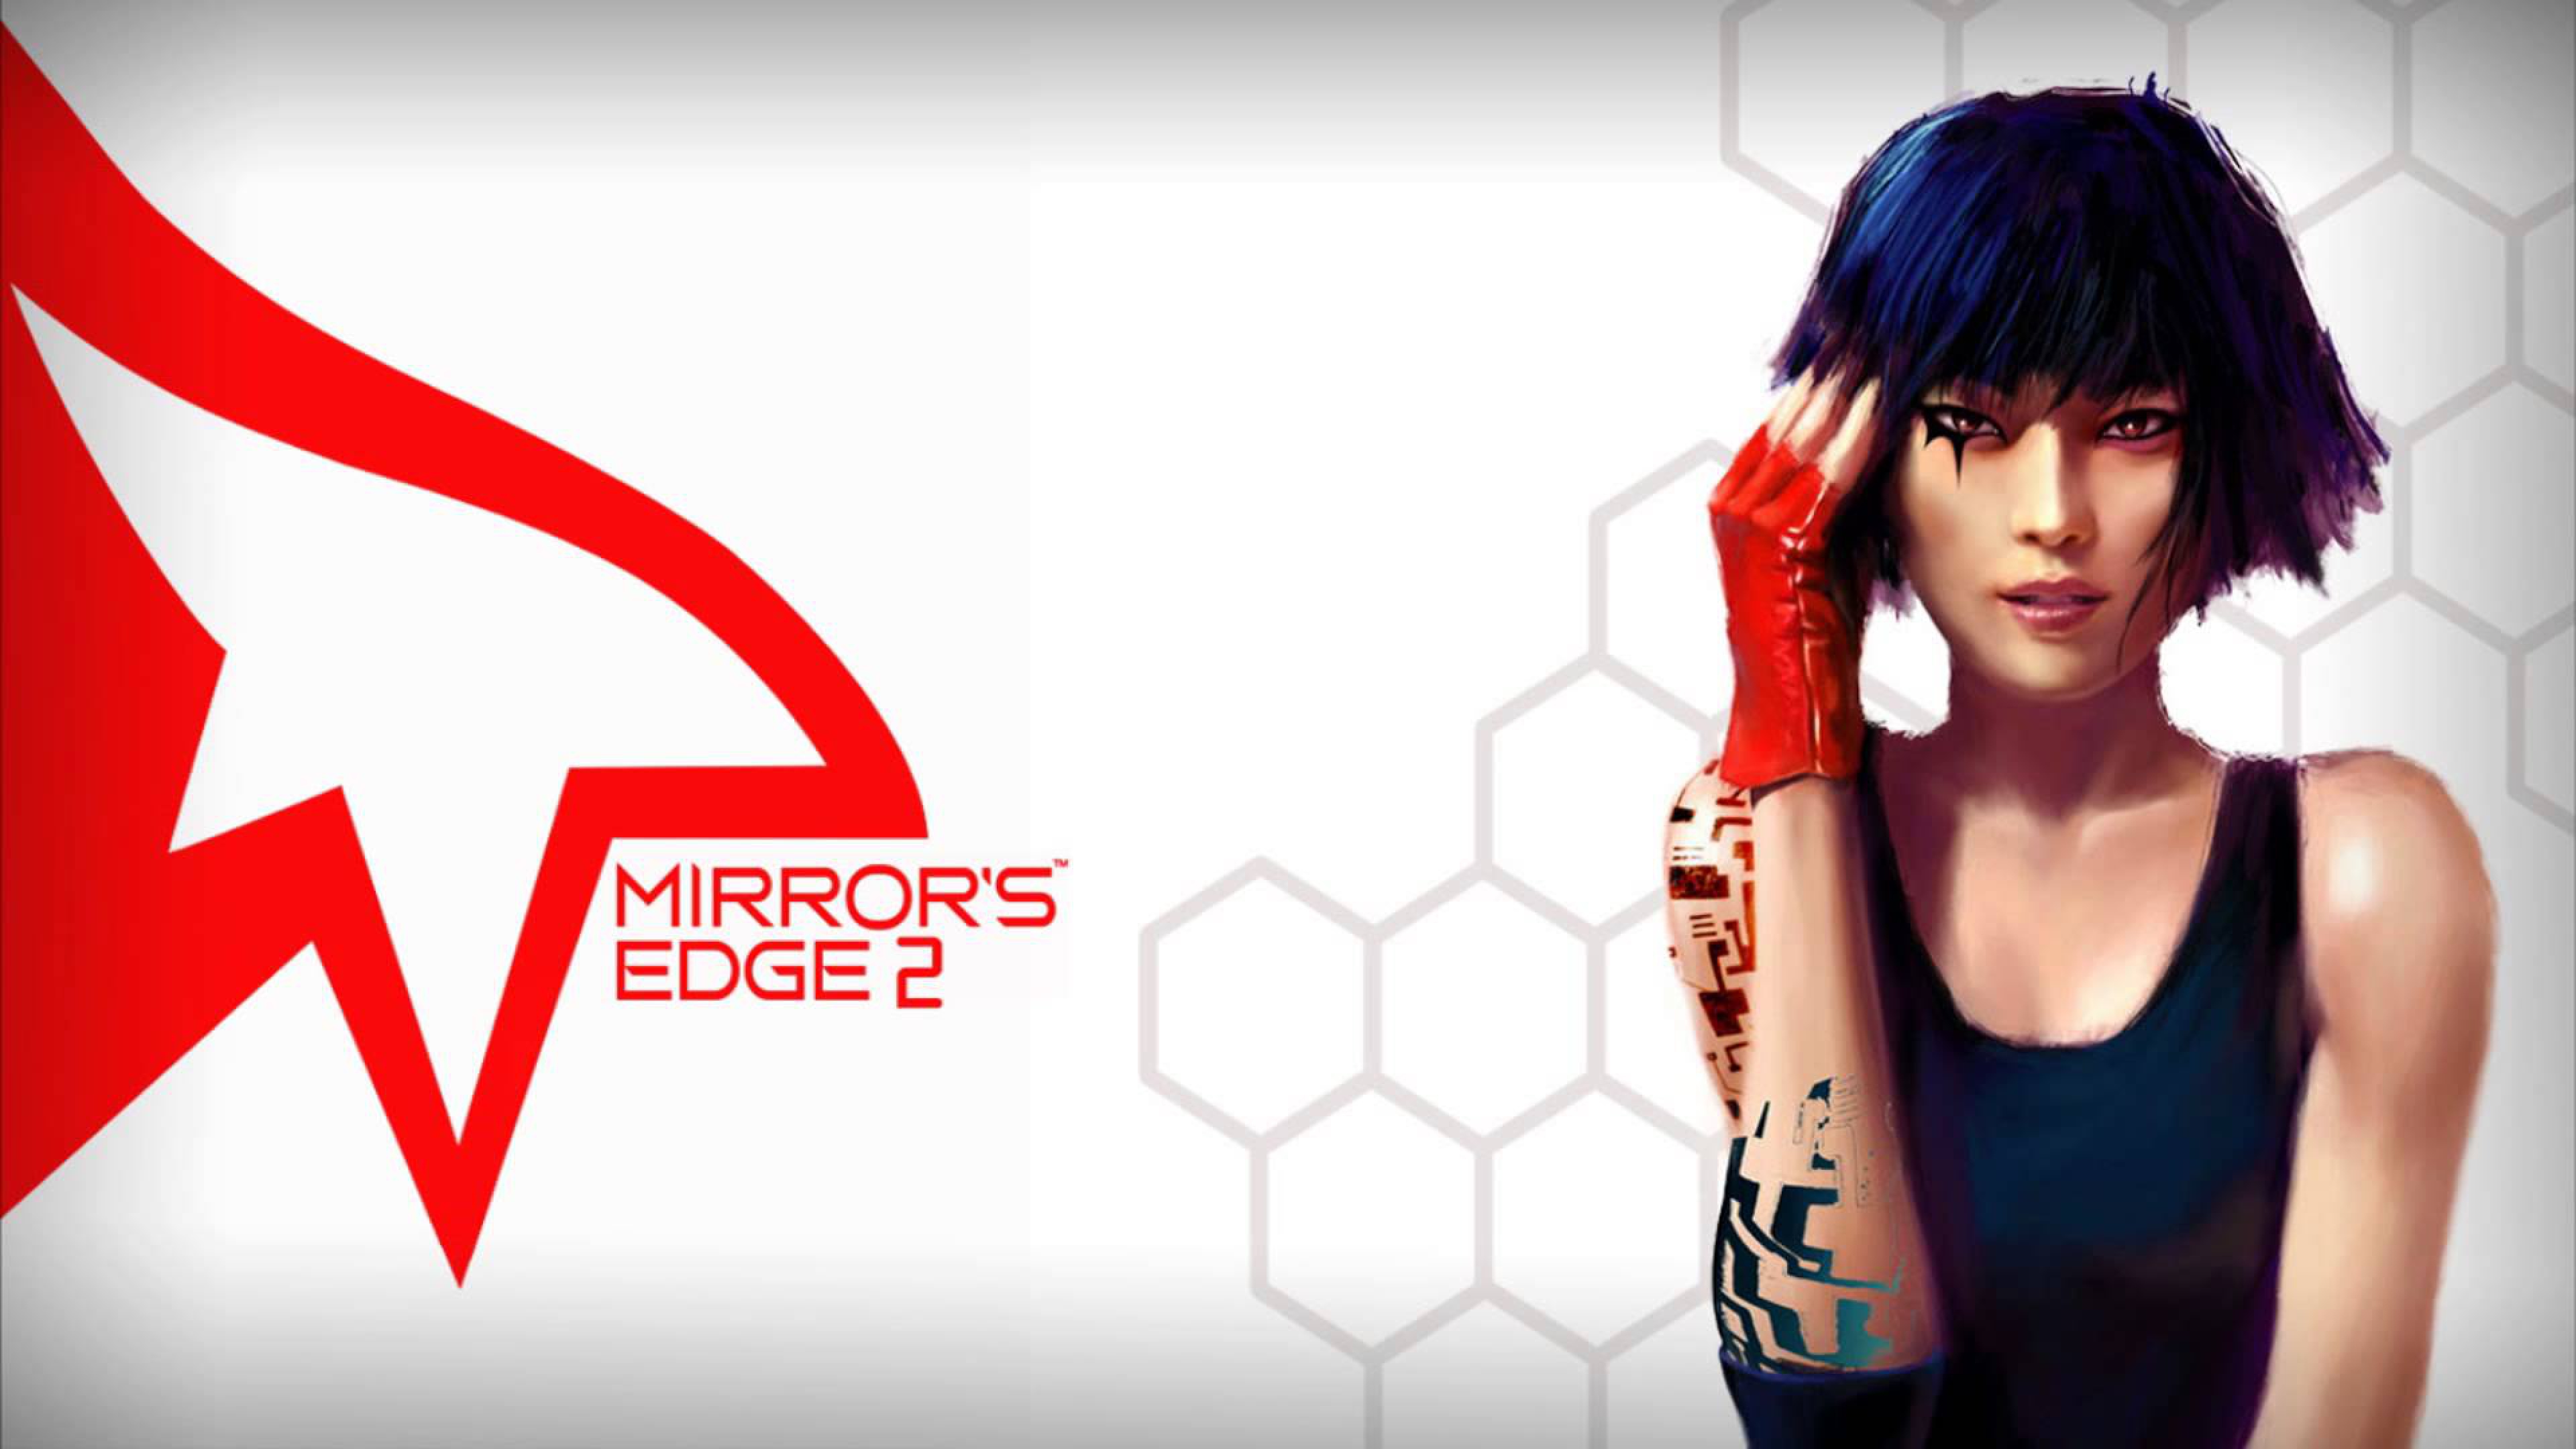 Mirrors edge hd games k wallpapers images backgrounds photos and pictures